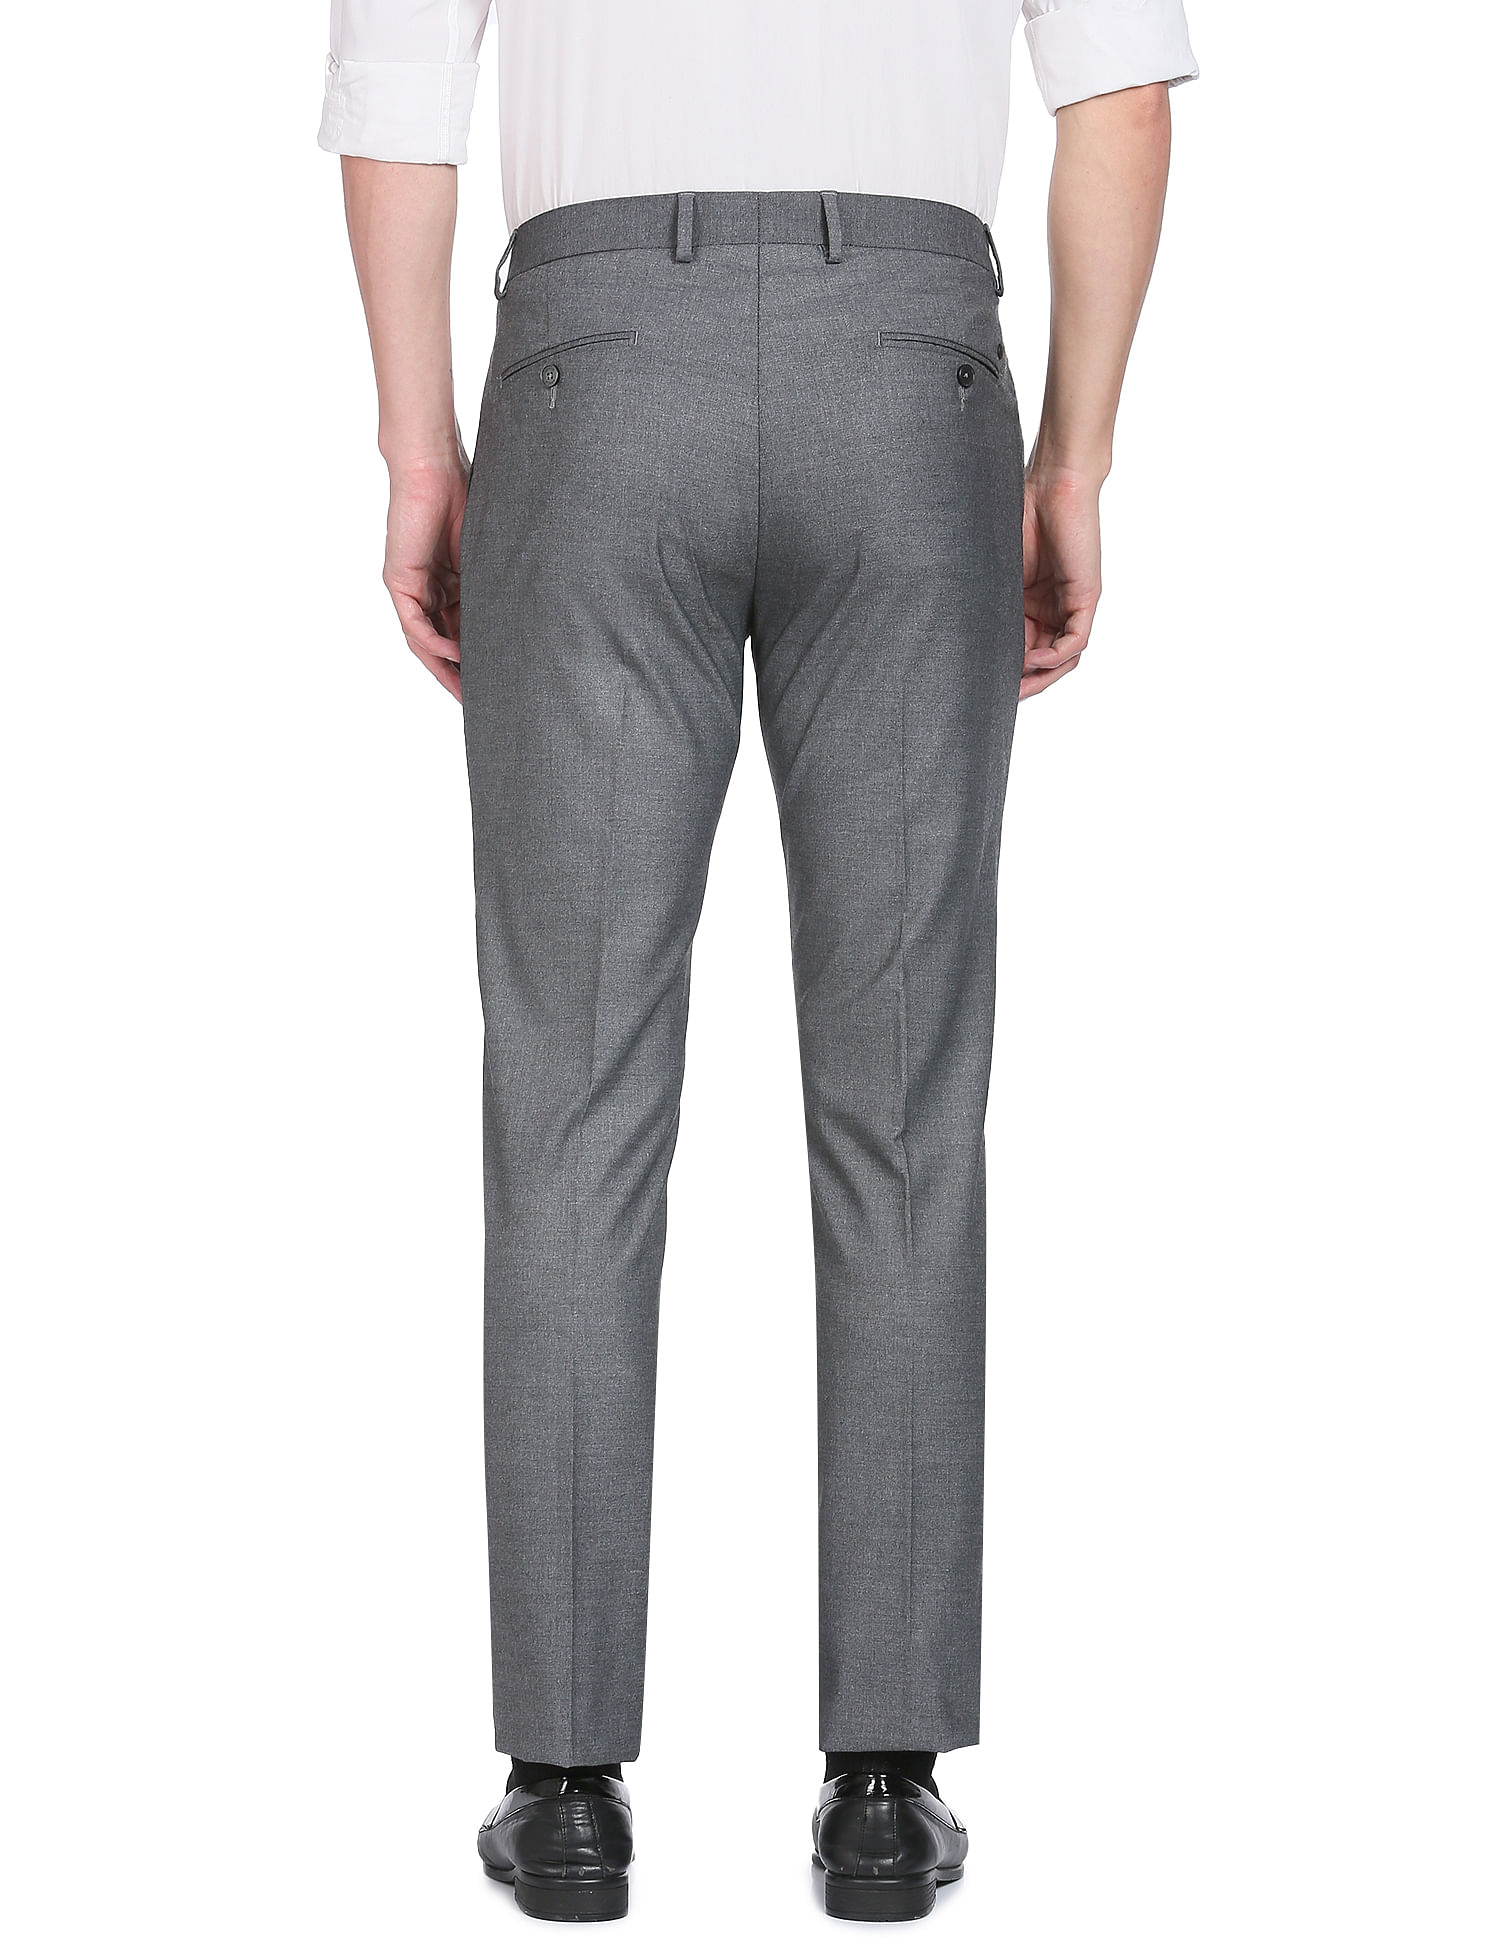 Textured Formal Trousers In Light Grey B95 Mandis